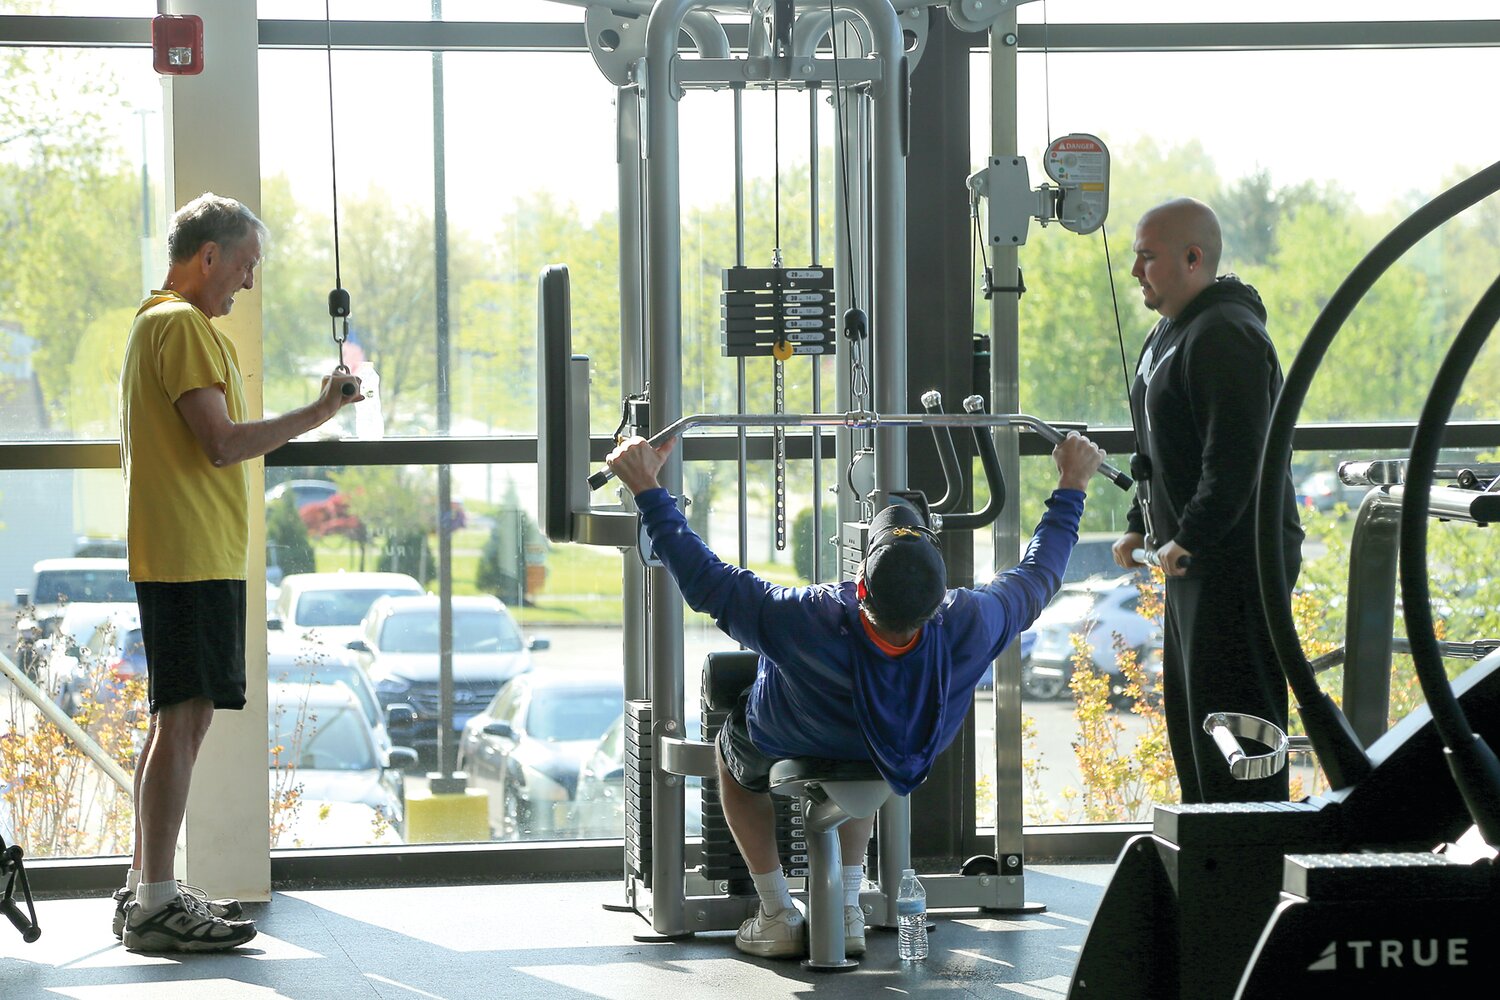 Visitors use strength training equipment at the YMCA Fairless Hills branch.